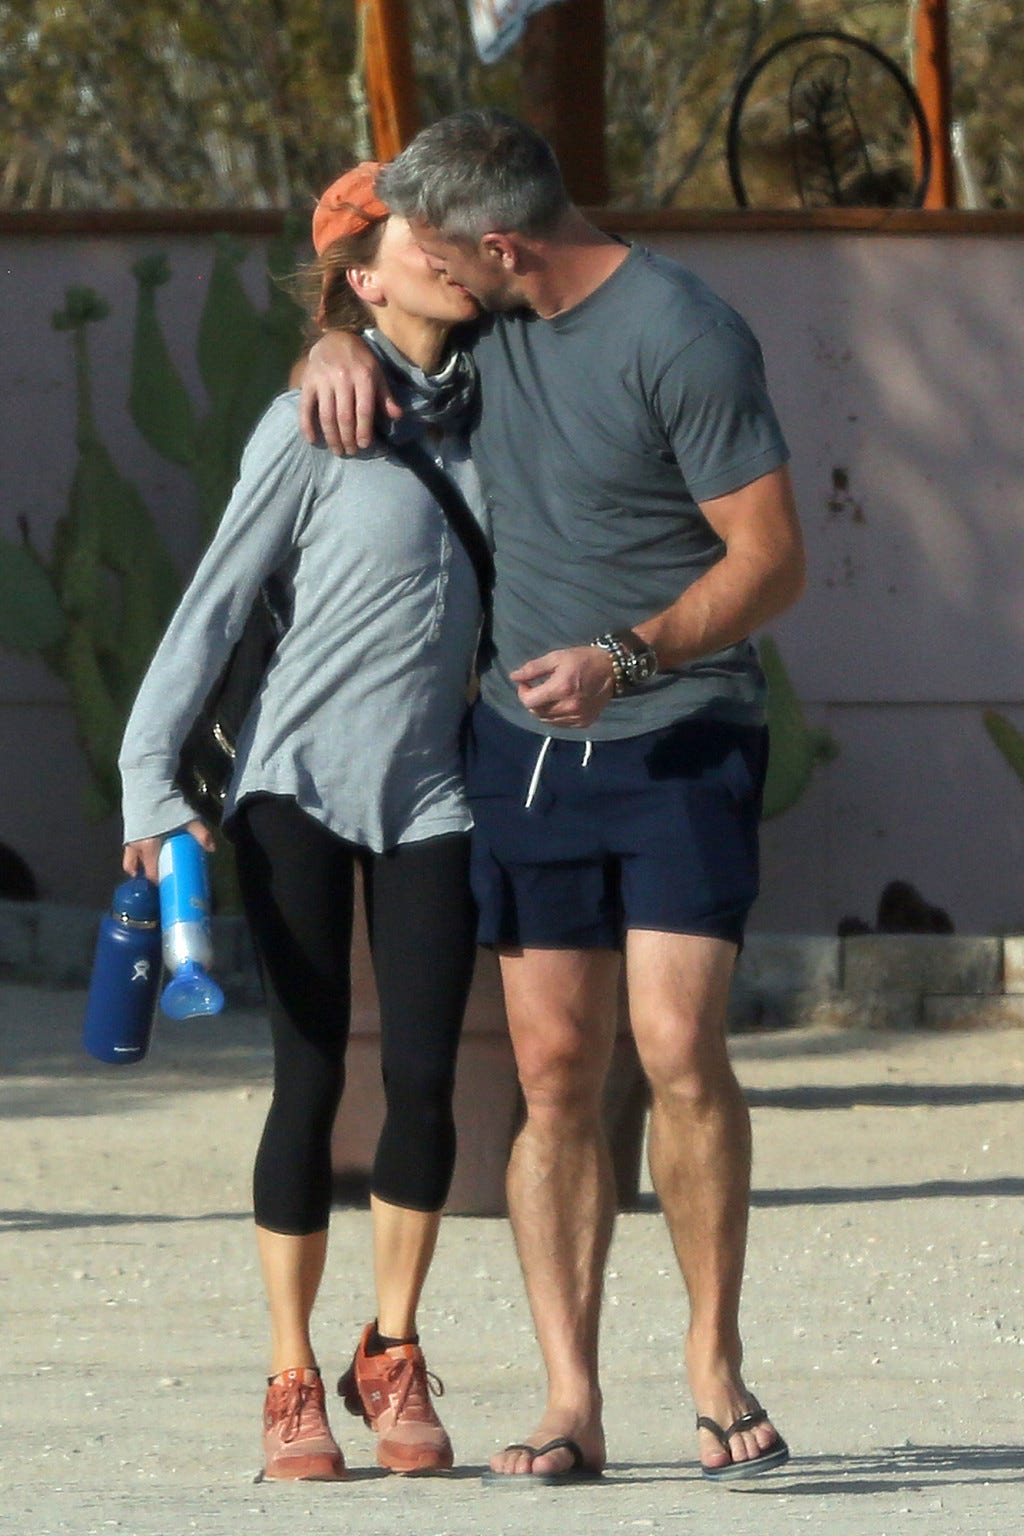 PREMIUM EXCLUSIVE: Renee Zellweger and Ant Anstead cant keep their hands off each other as they head off on a romantic trip together, Renee and Ant stop at a hardware store to stock on on fire wood and share a very passionate kiss